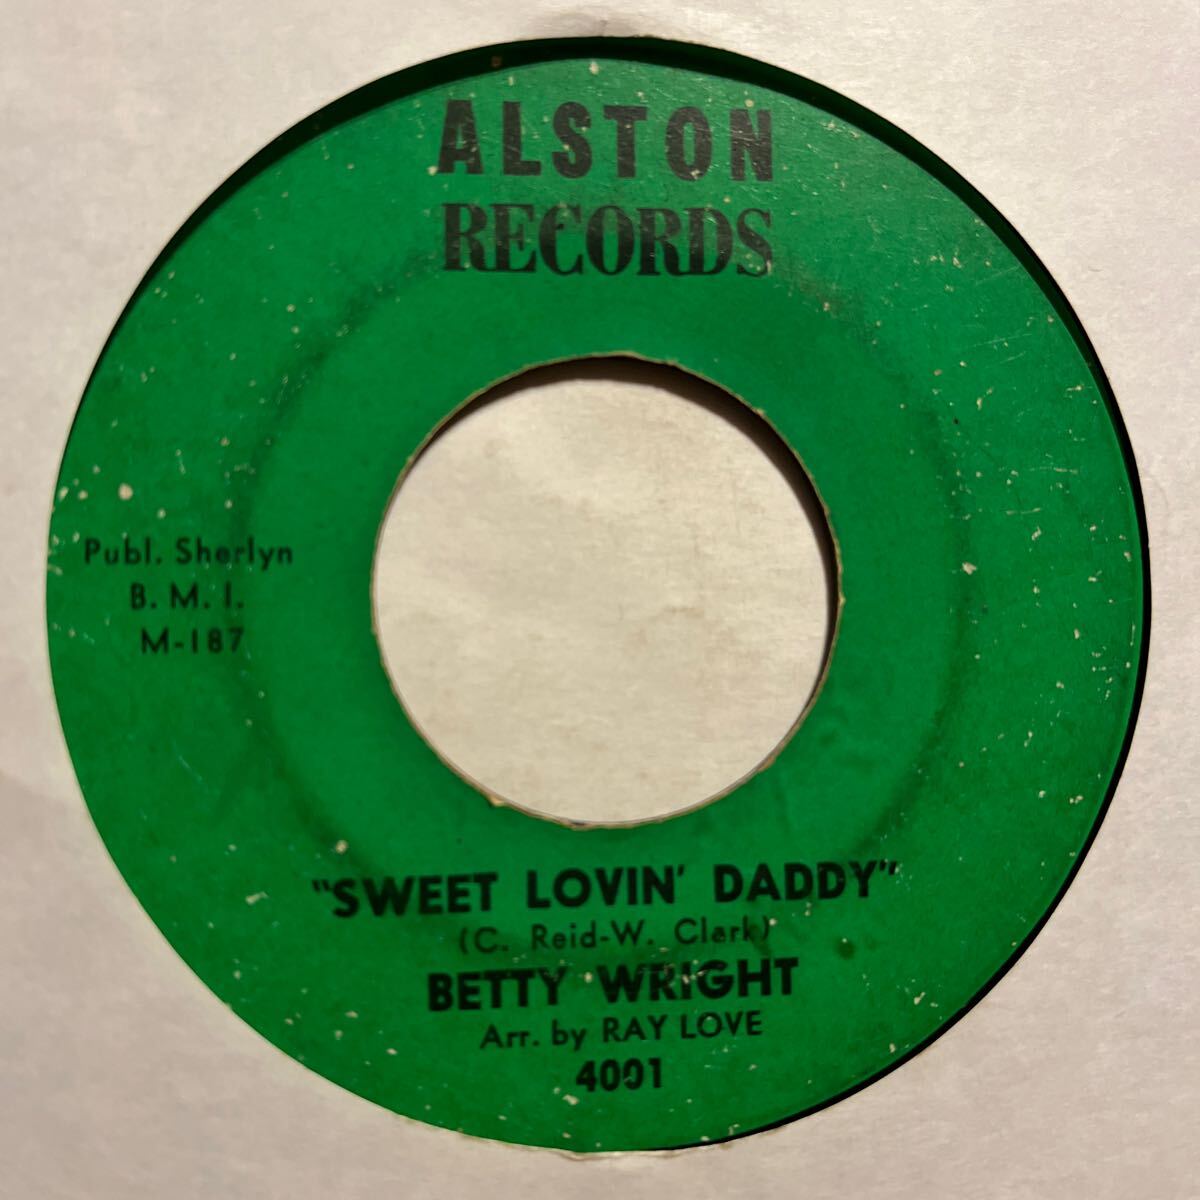 US盤 7インチ BETTY WRIGHT # GIRLS CAN'T DO WHAT THE GUYS DO / SWEET LOVIN' DADDYの画像2